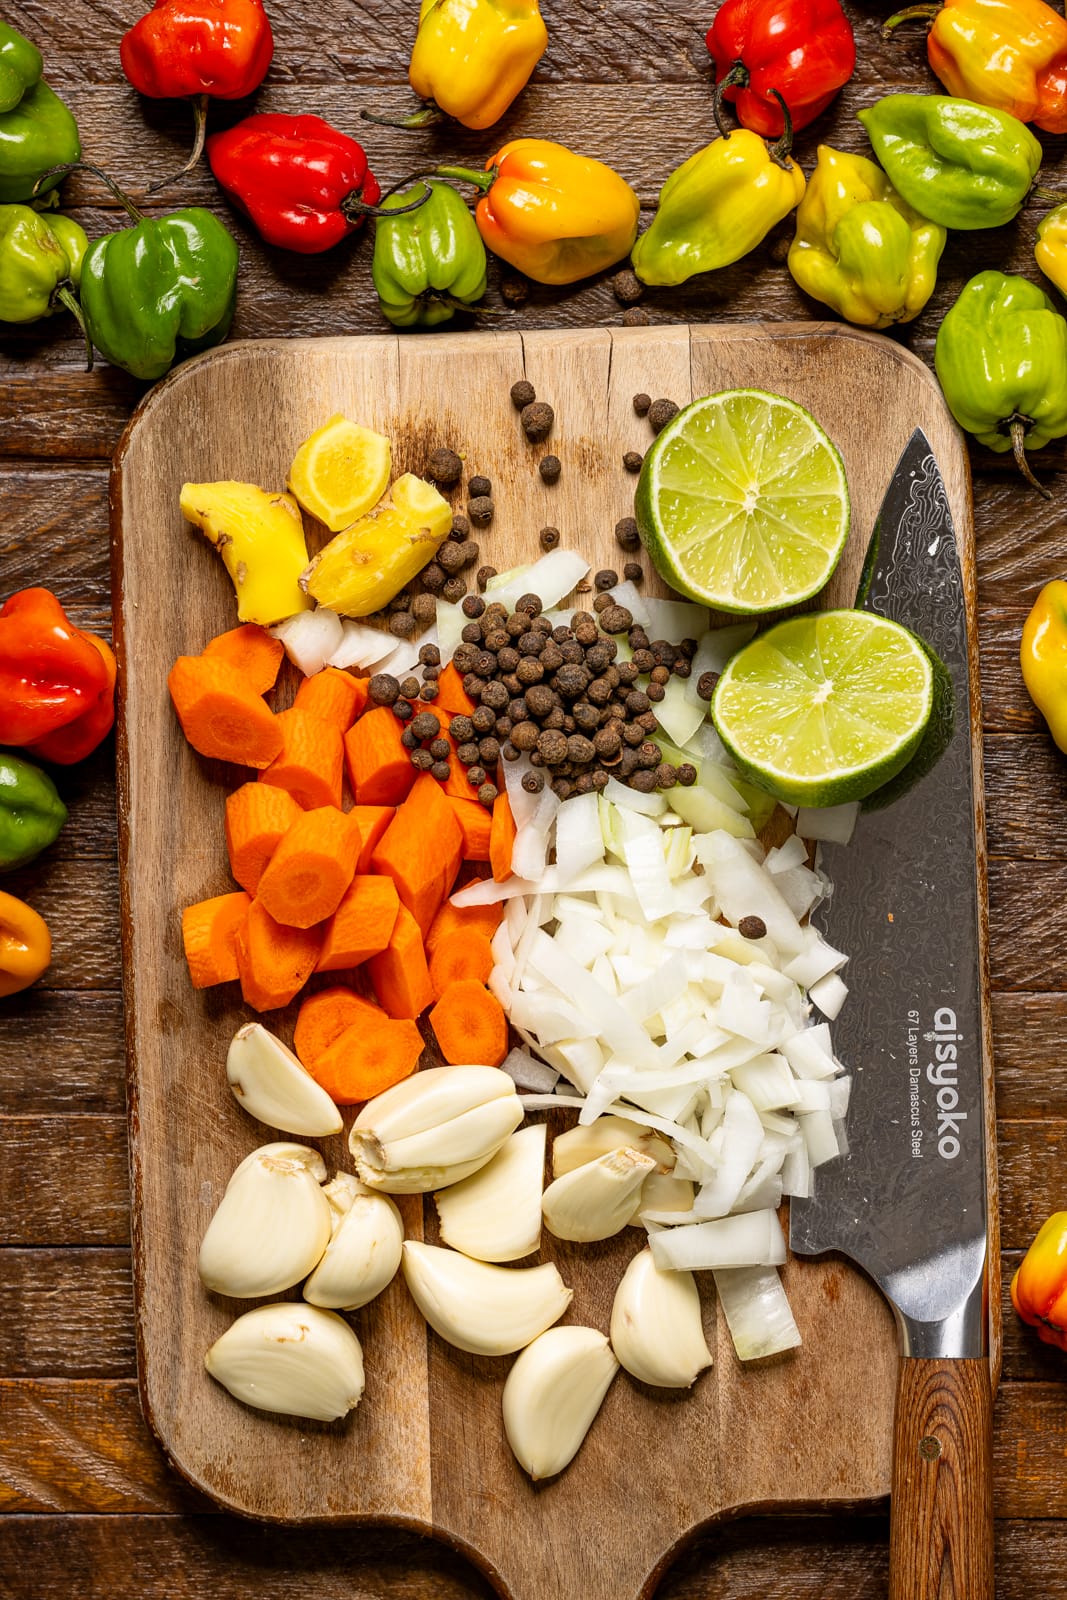 Ingredients being chopped on a cutting board with a knife.